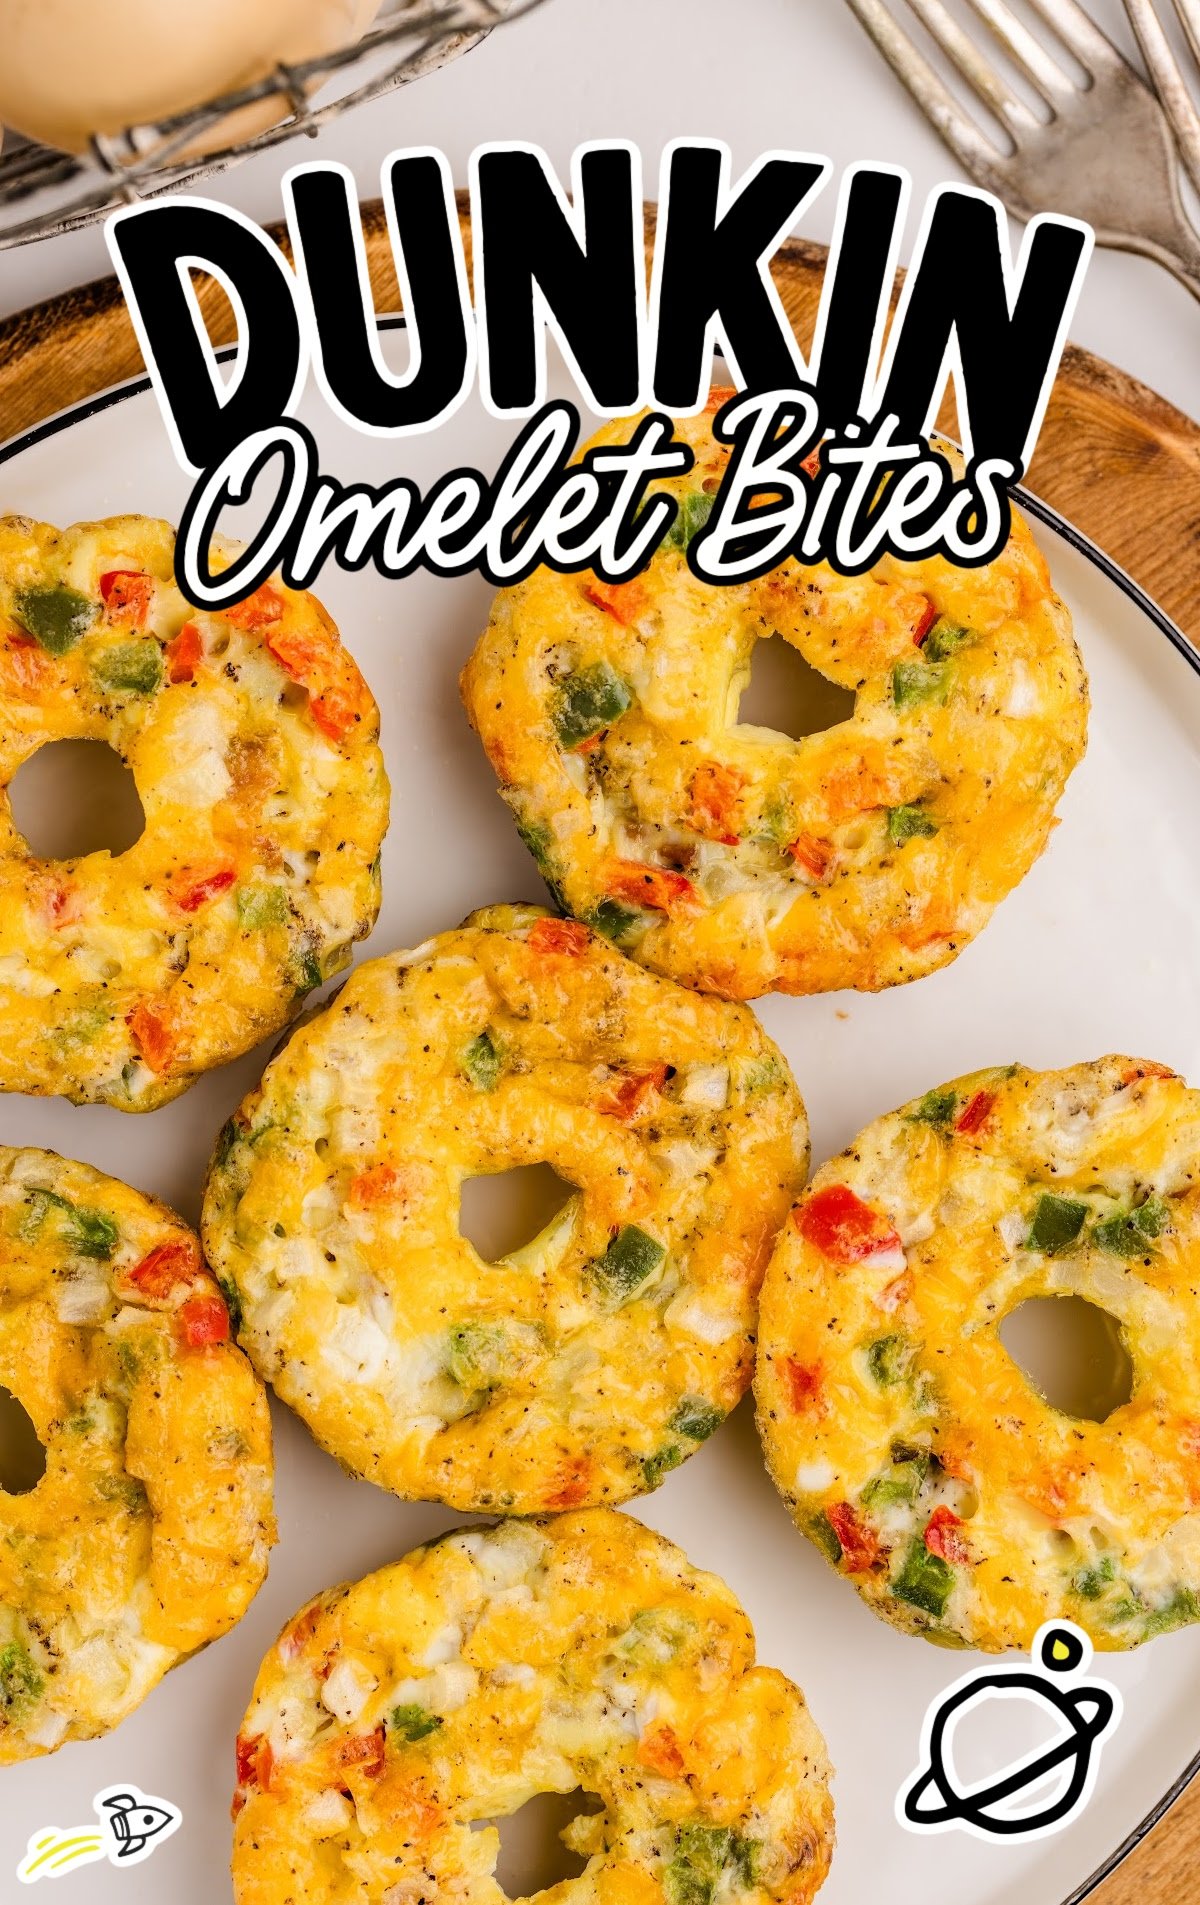 several mini omelet bites on a plate to eat